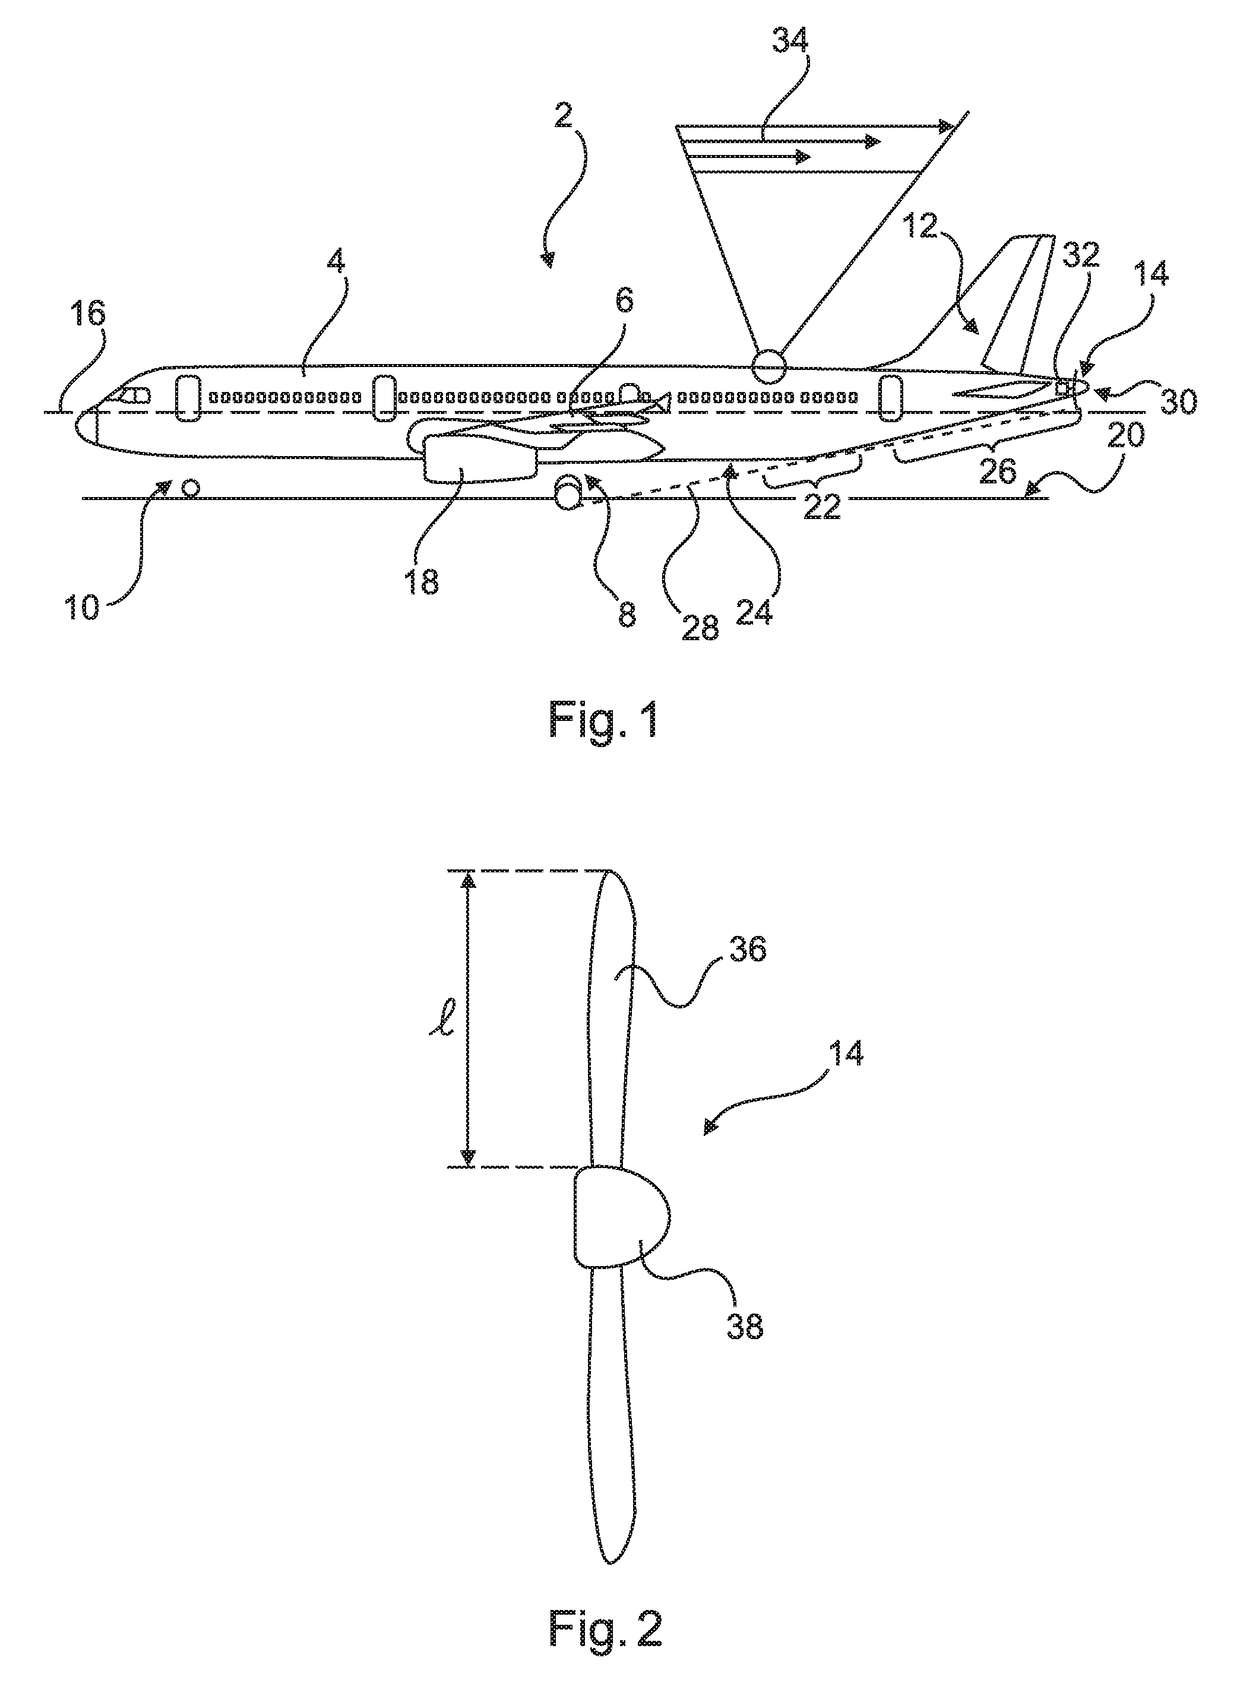 Aircraft having a drag compensation device based on a boundary layer ingesting fan